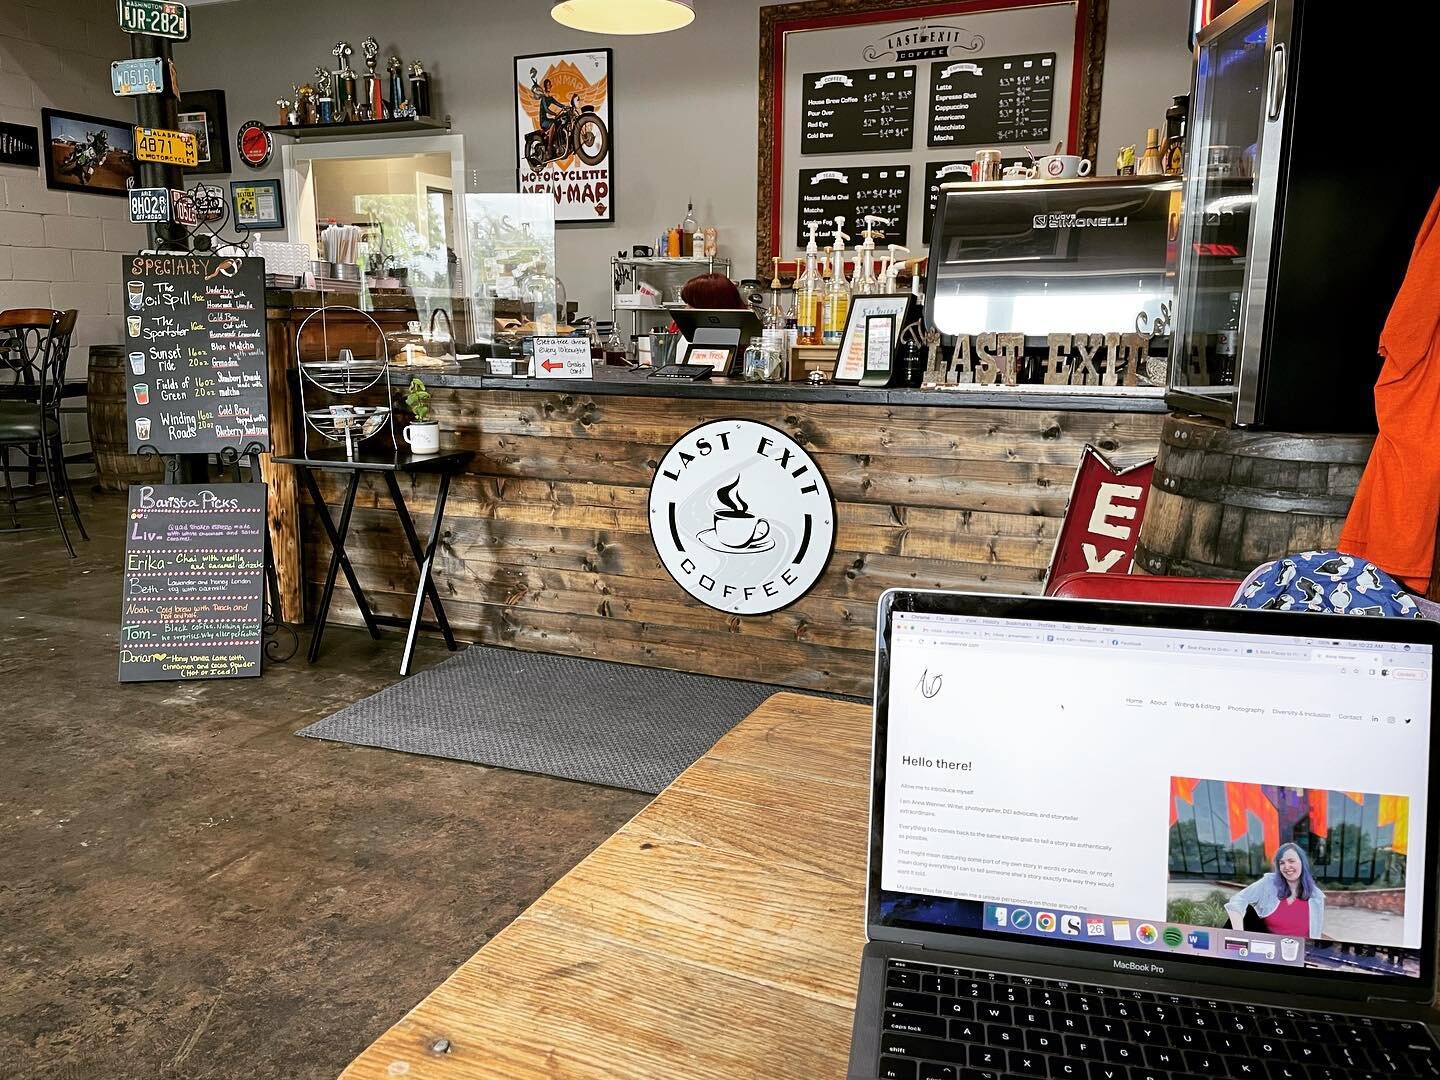 Working from @lastexitcoffee this morning while I wait for my dog Teddy to get groomed at A Bath and a Brush. First time here and can say confidently it&rsquo;s a seriously underrated gem. Located in the Grandview area in KC Metro. Check it out if yo